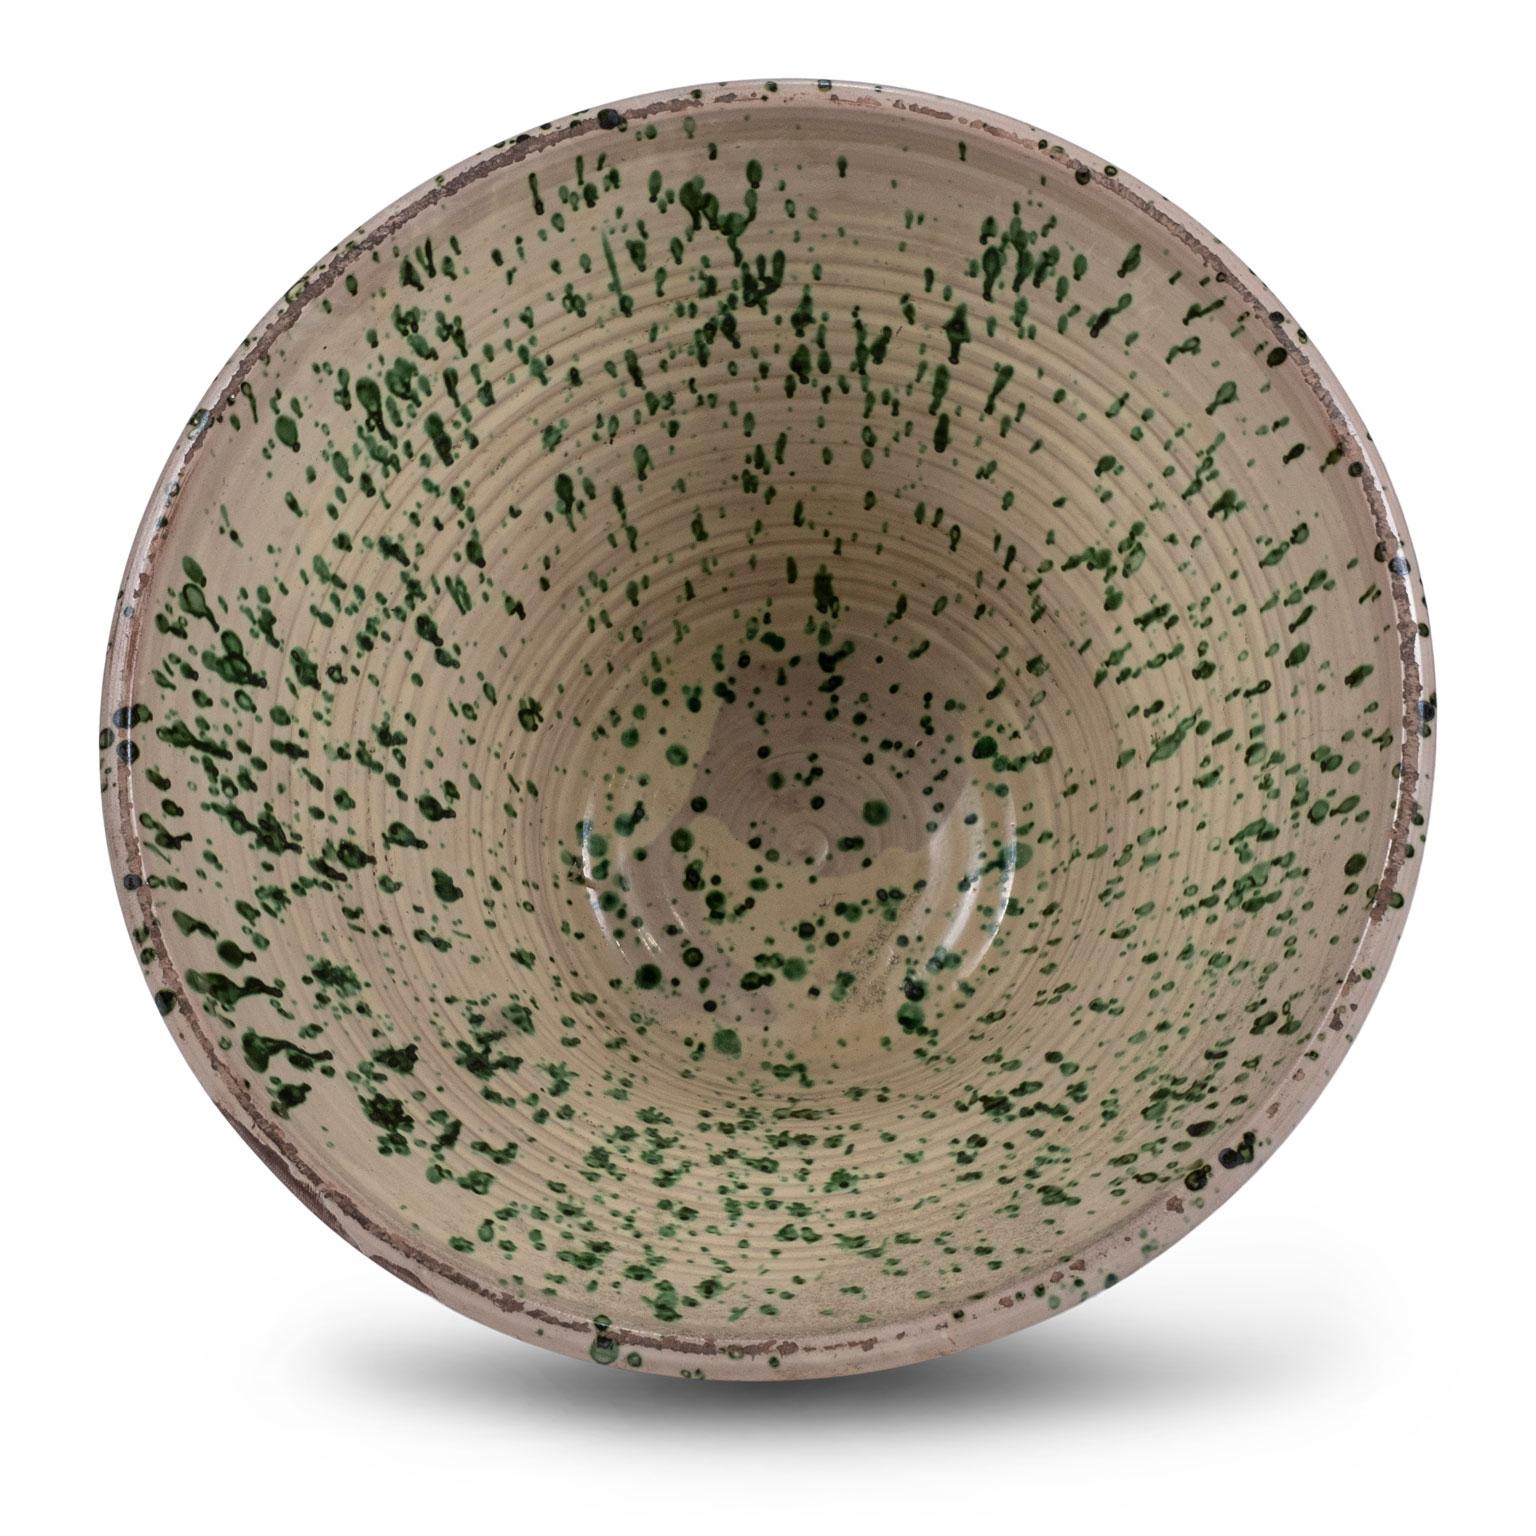 Very large colorful glazed earthenware passata bowl from Southern Italy (Puglia). This rustic 19th century terracotta bowl was used in the Italian countryside to make tomato passata. Handcrafted and glazed in a pesto-color green pattern over